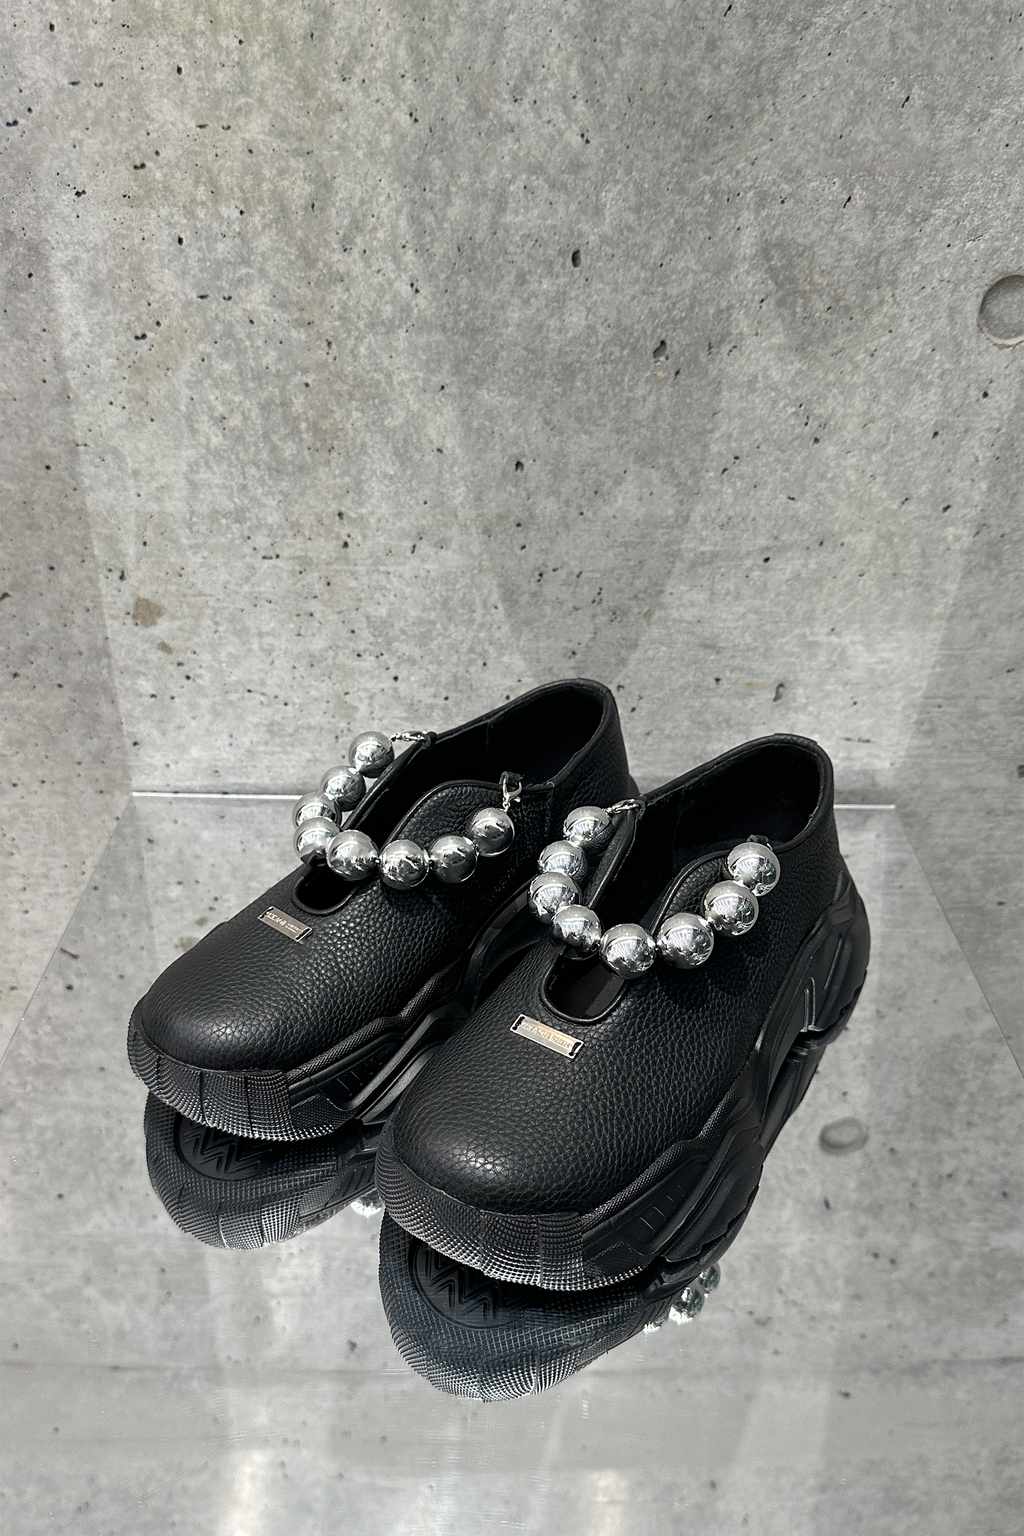 Chain Slit Airy Shoes_Ball